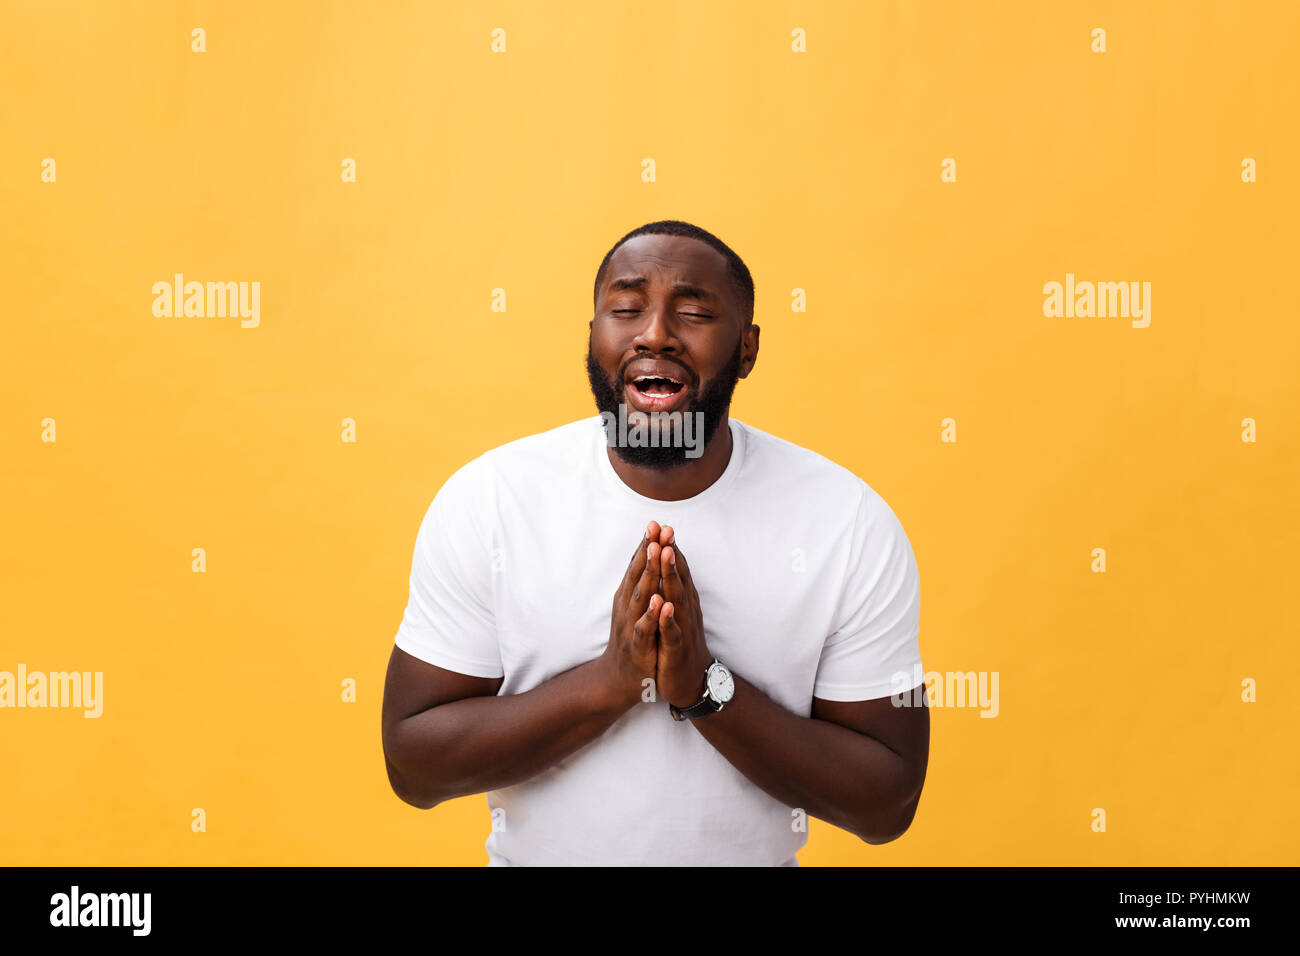 Studio portrait of young African American man in white shirt, holding hands in prayer, looking at the camera with thoughtful skeptical expression on his face, suspecting of something. Body language. Stock Photo